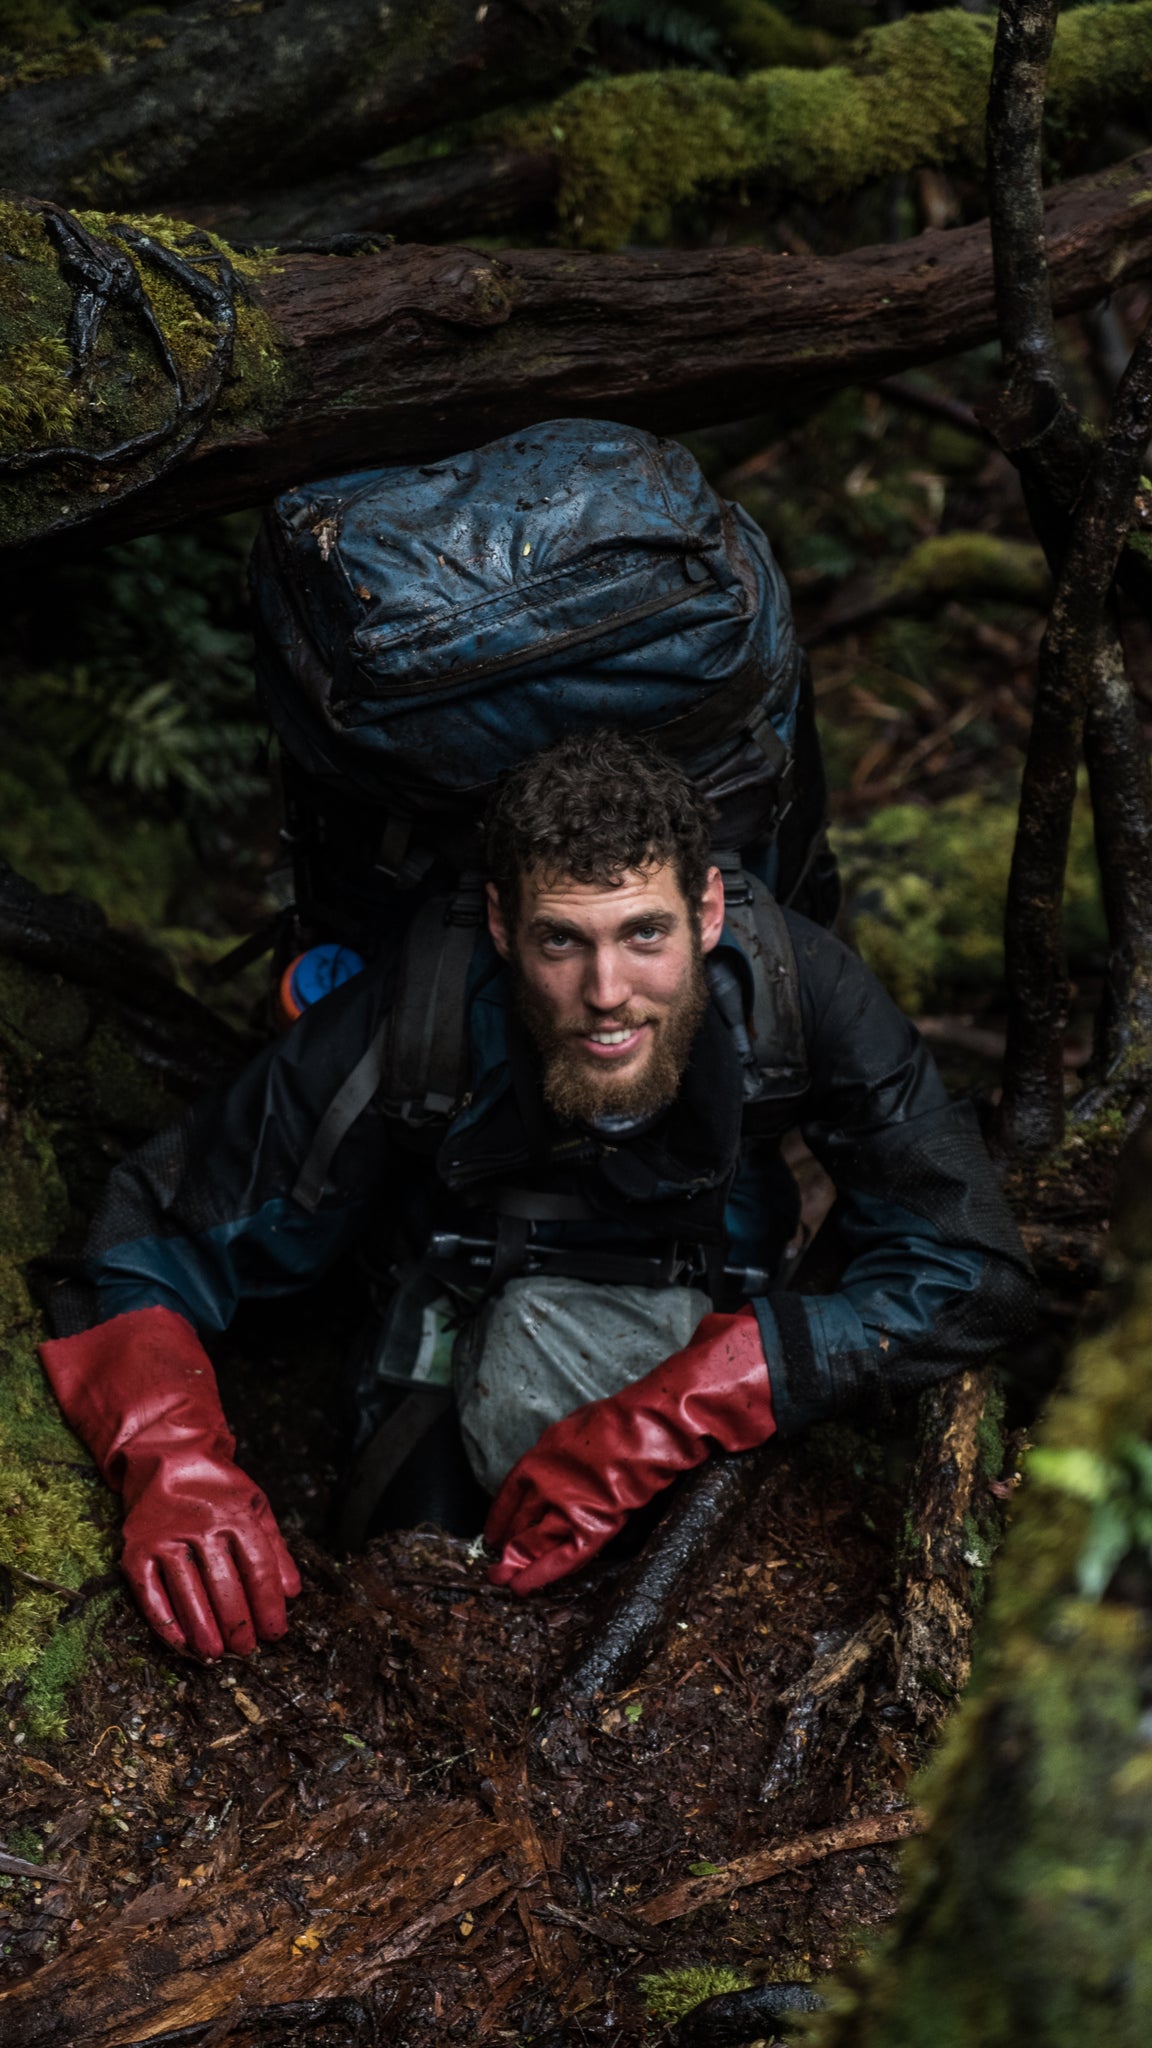 Andy Szollosi climbing in Tasmania into know where carrying a 45 kilo pack. This photo from one of TASPARKS trails in the wilderness of Tasmania when filming Winter on the Blade. Hiking in Tasmania is a passion of Andy's and carrying in  his camera gear to capture these rugged landscapes and epic adventures is what we love about Andy Szollosi. Winter on the Blade is one of the most epic films following a crew of climbers in Tasmania tackling Federation Peak. This film has been aired around the world through the Banff Mountain Film Festival 2018.